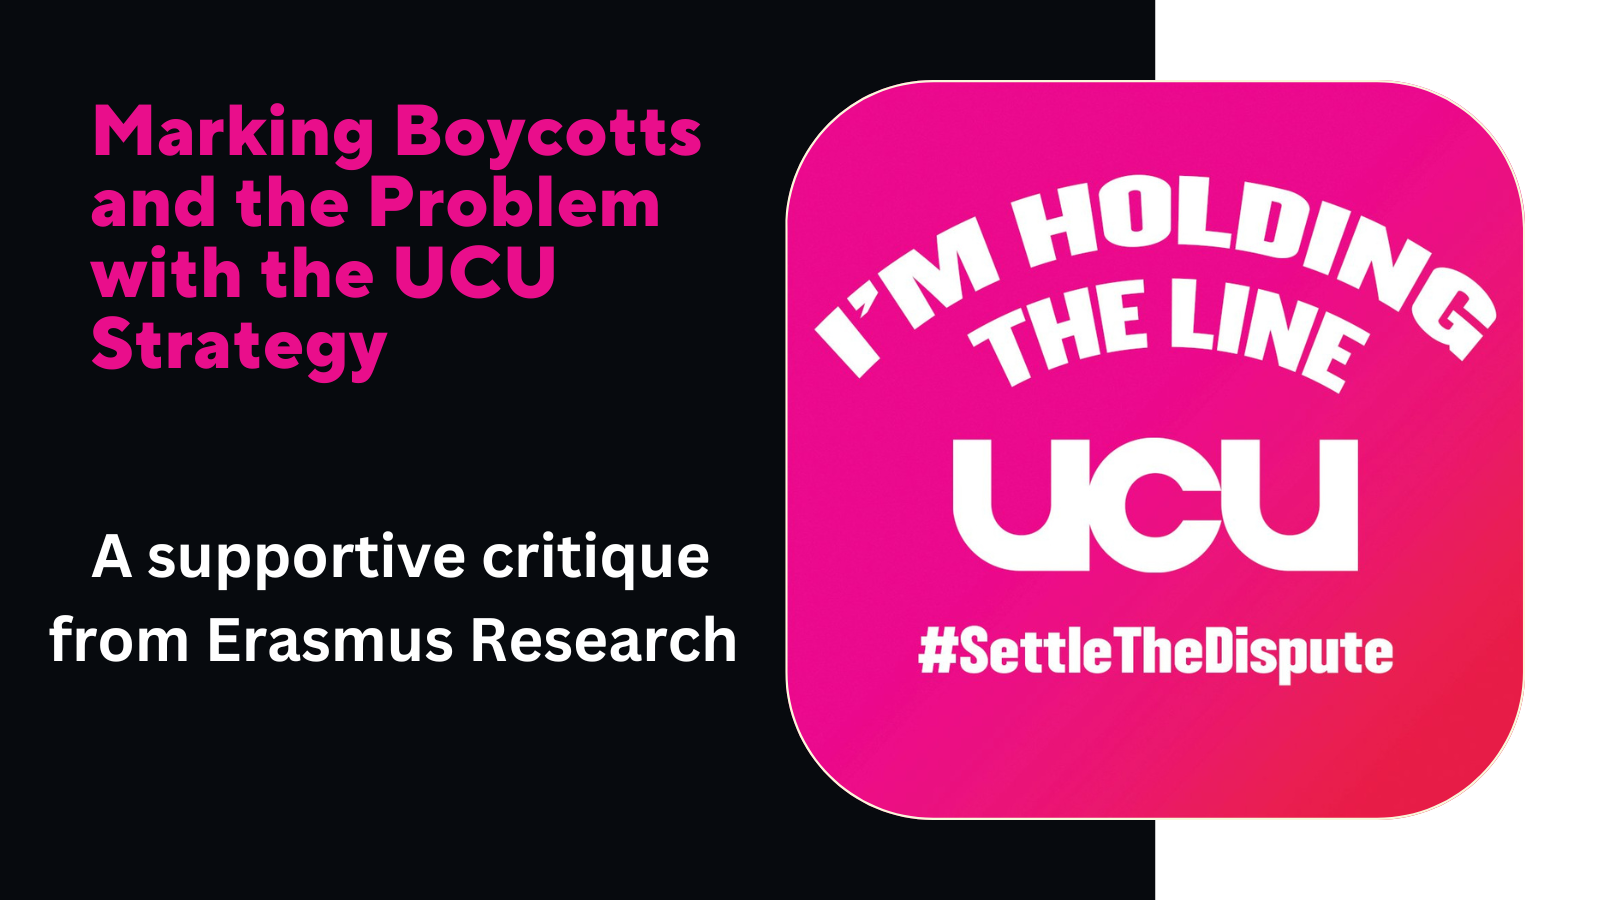 Marking Boycotts and the Problem with the UCU Strategy